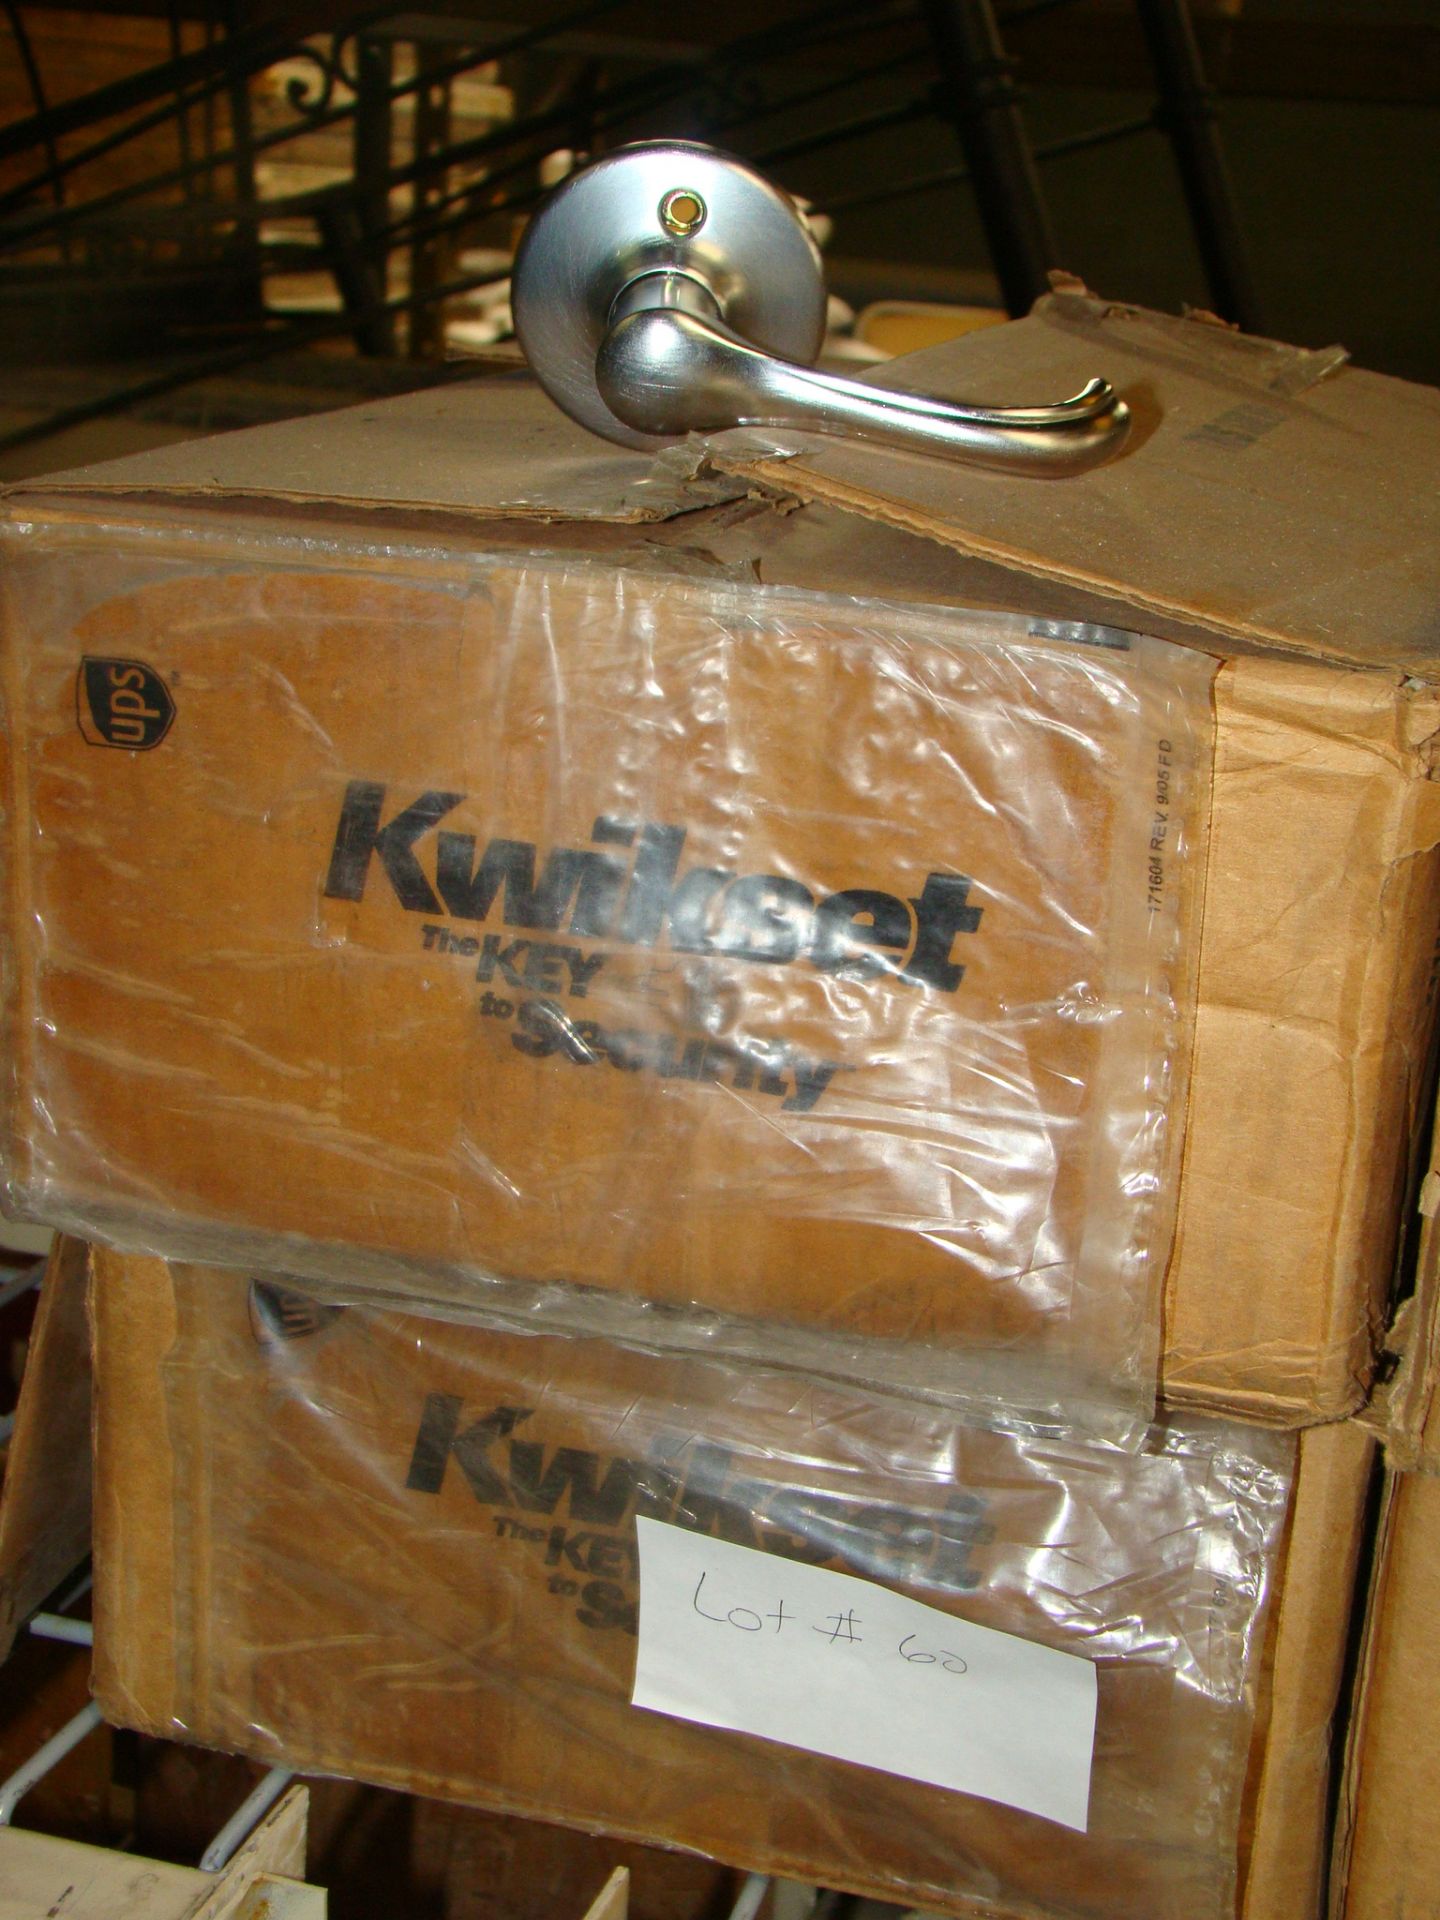 Lot of Boxes of Kwikset Dorian Interior Pack